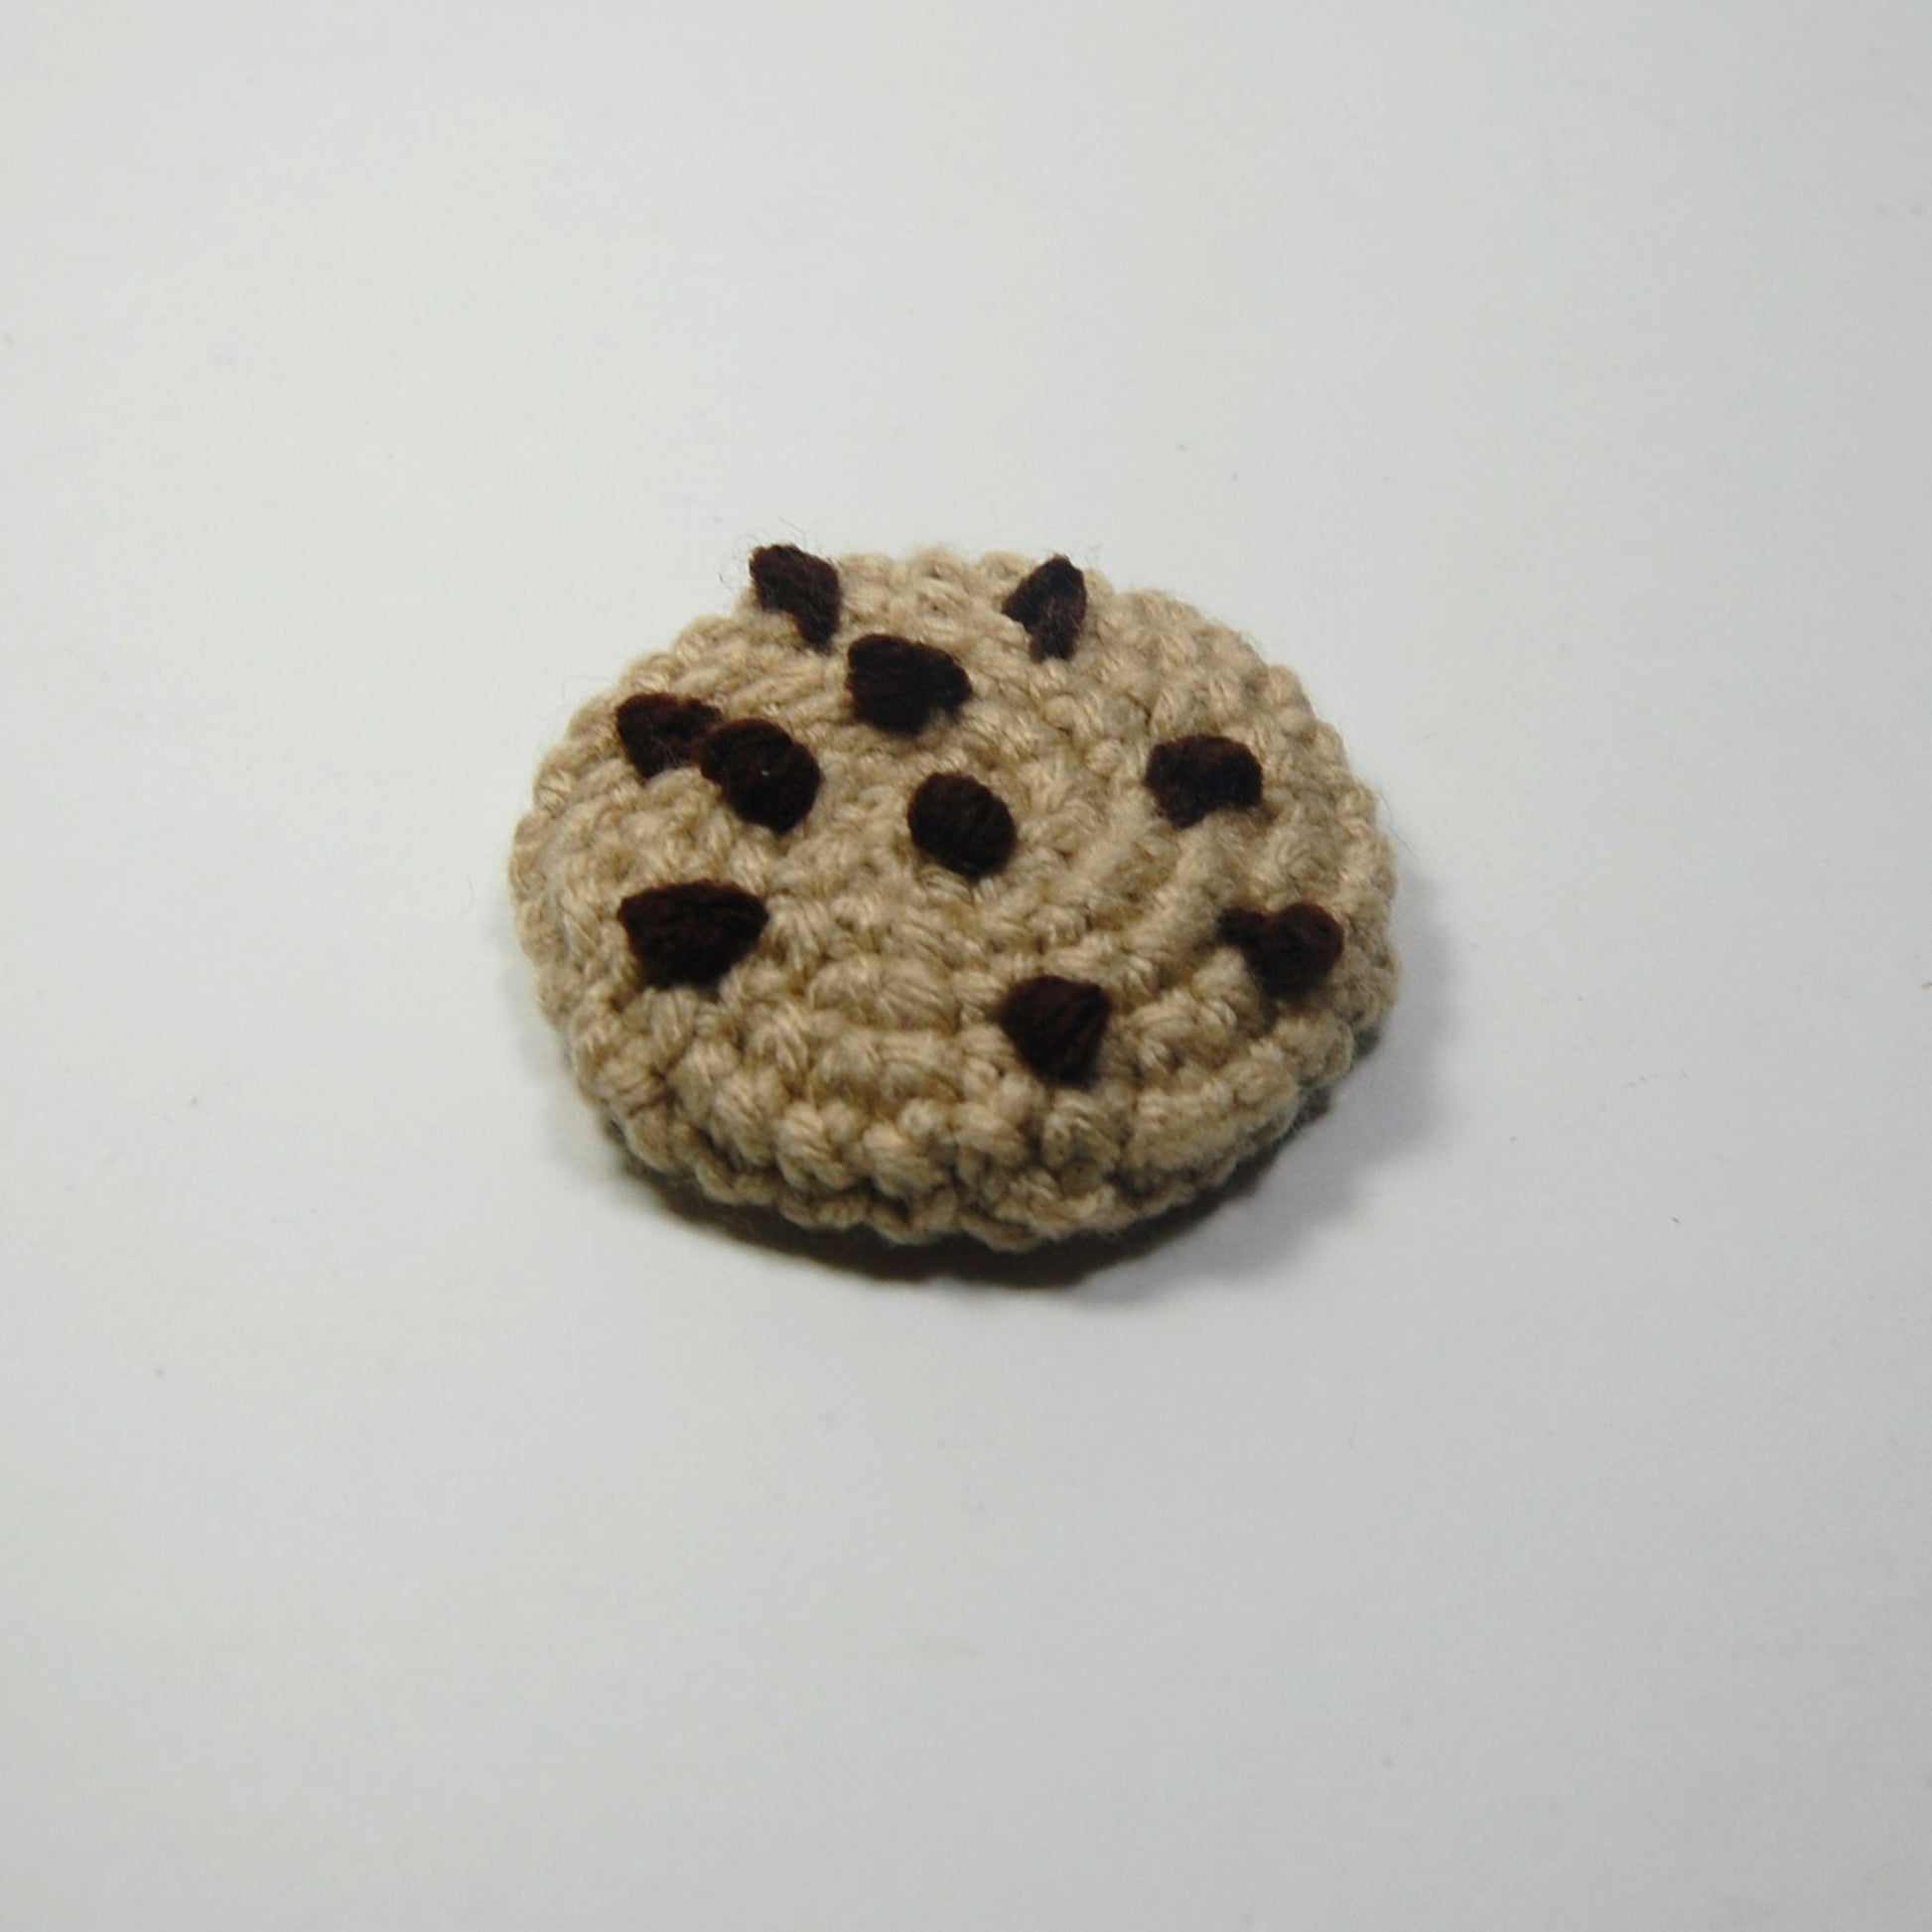 single chocolate chip crocheted cookie